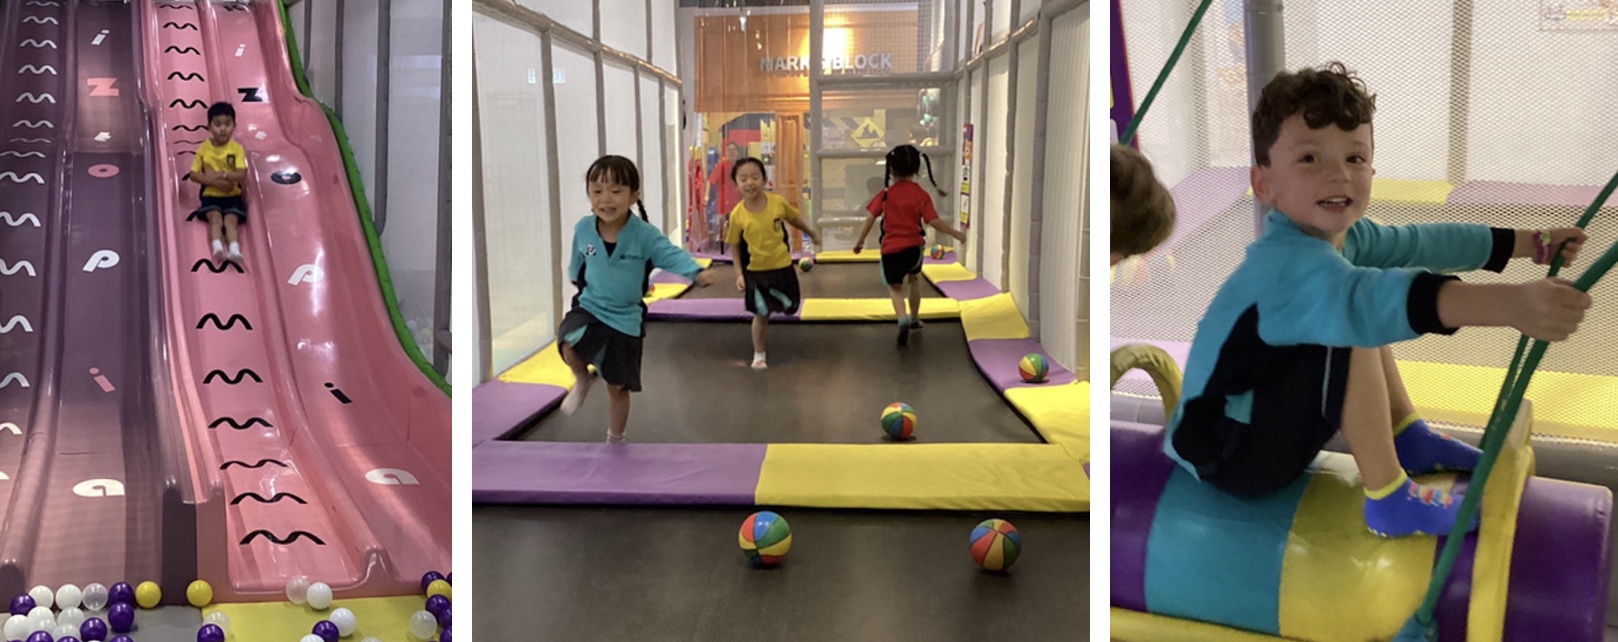 Early Years Campus Weekly Update - Early Years Campus Weekly Update